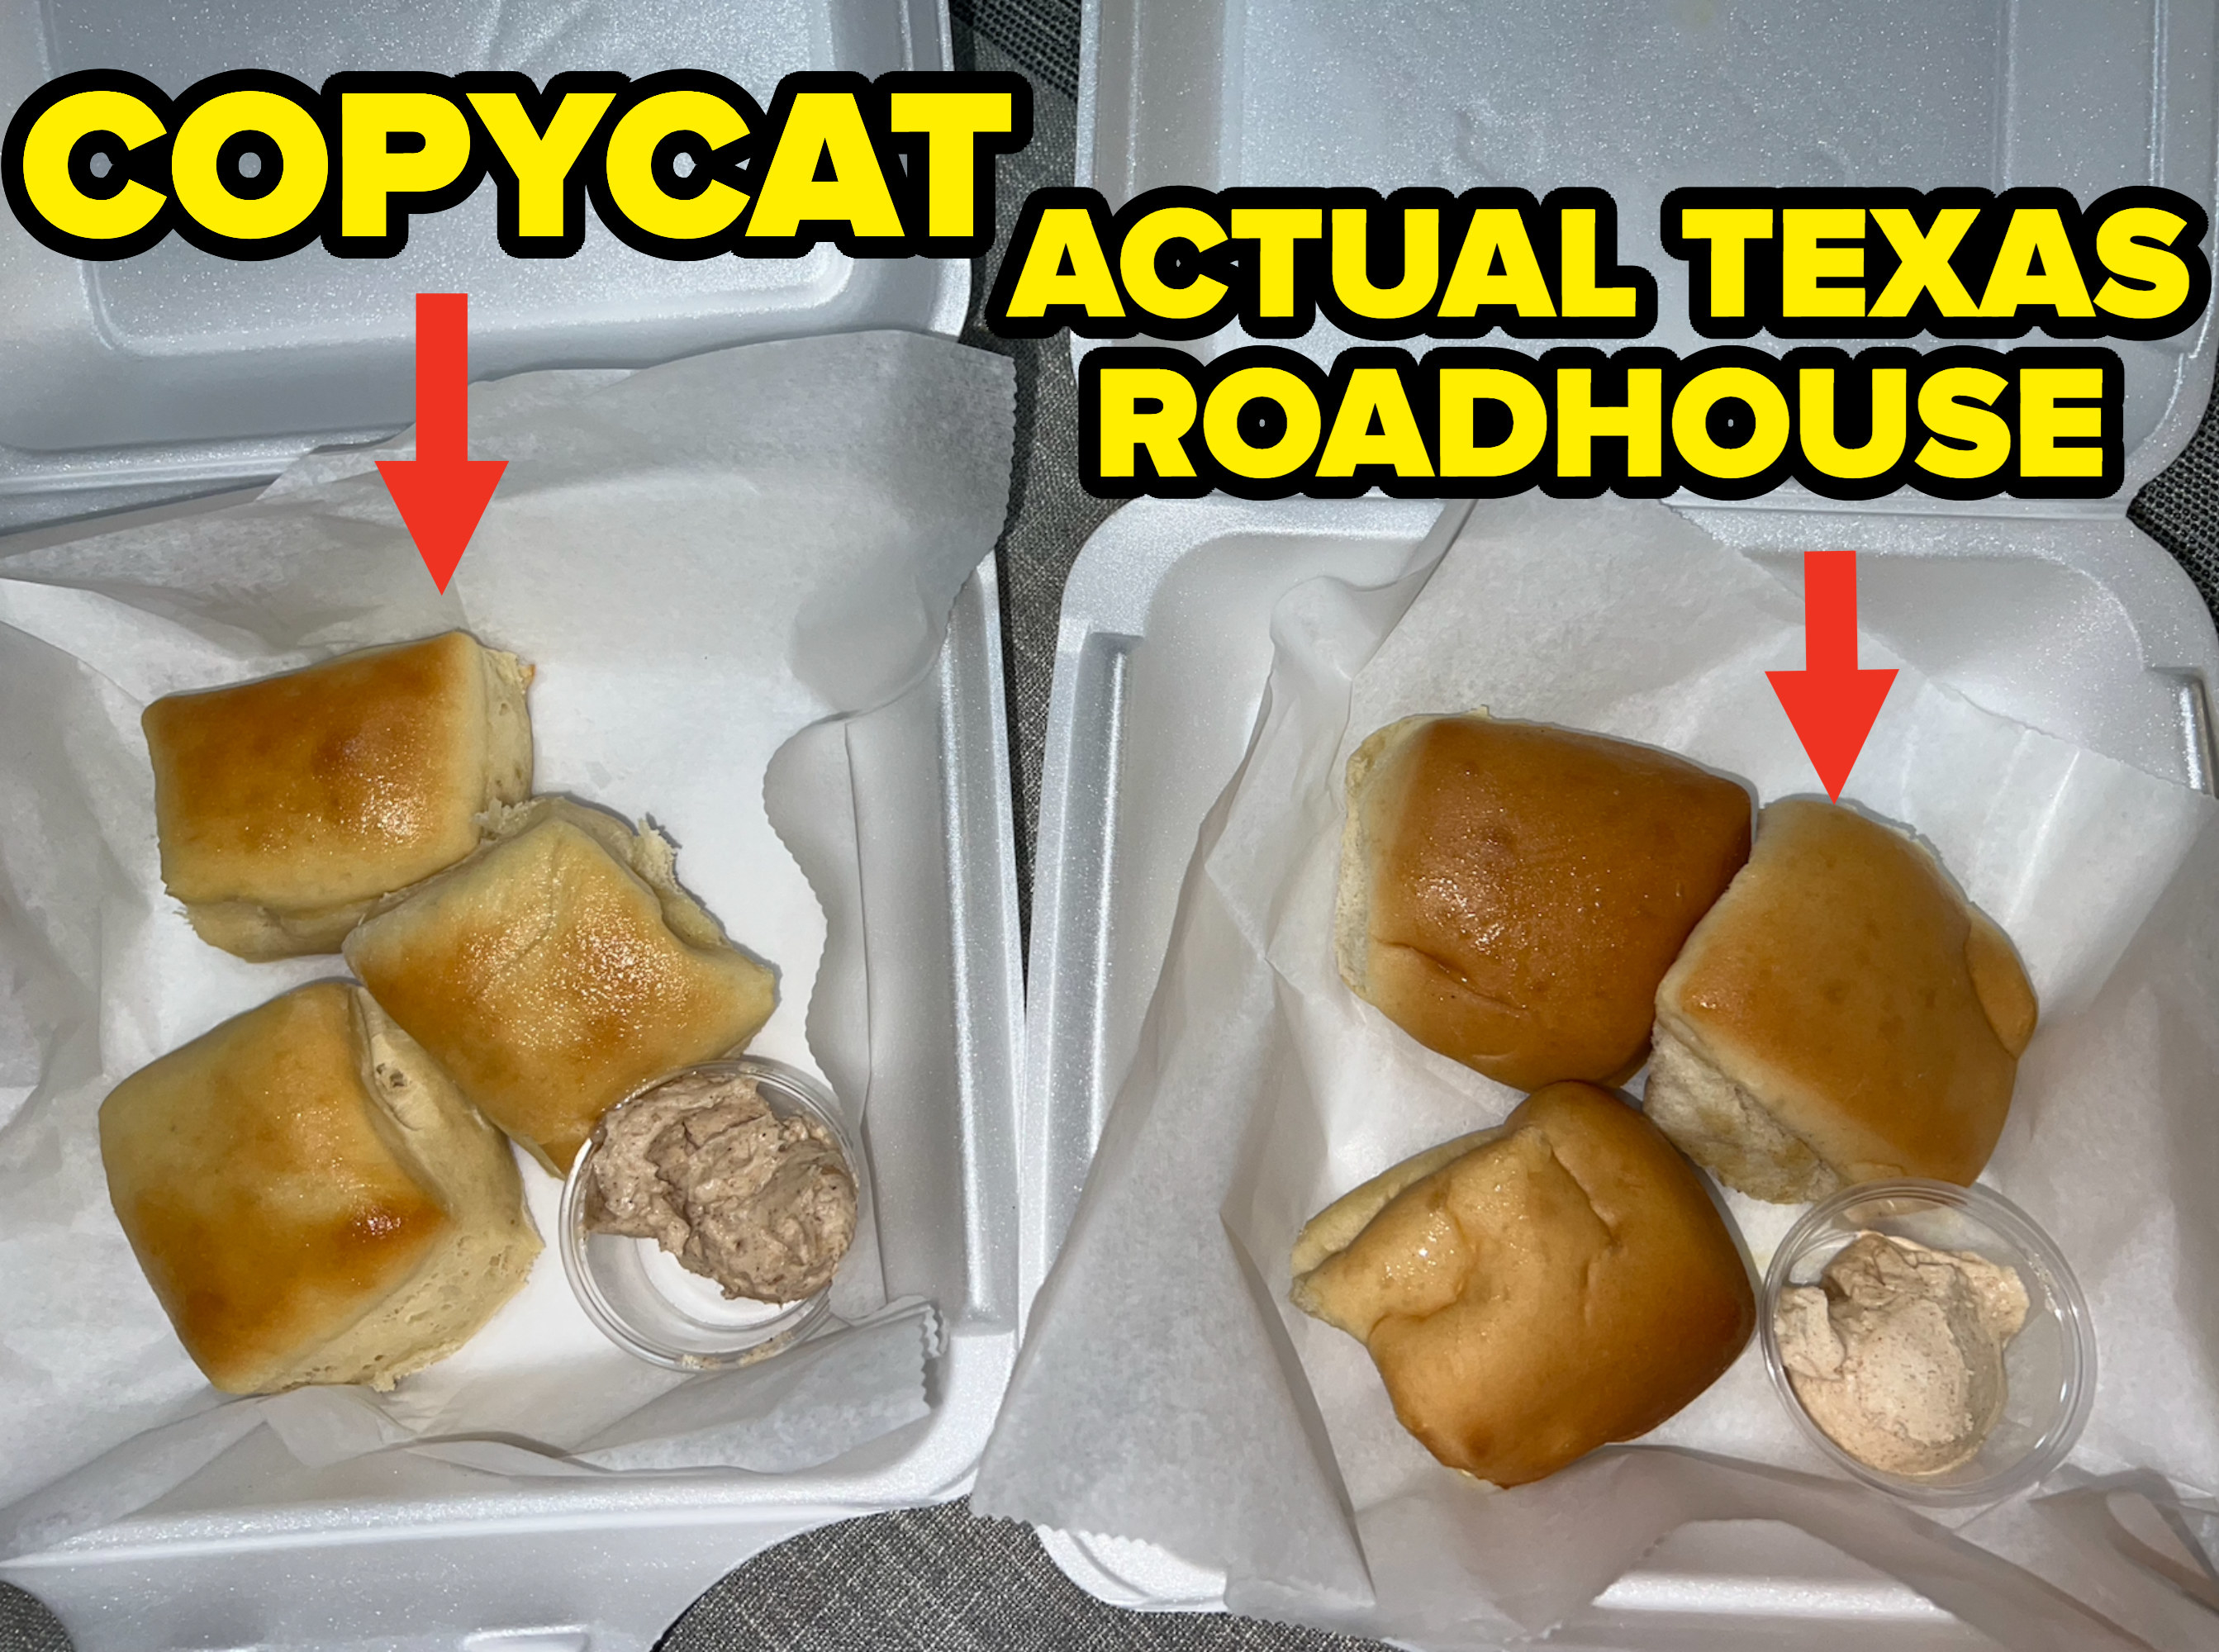 The copycat rolls on the left and the Texas Roadhouse rolls on the right